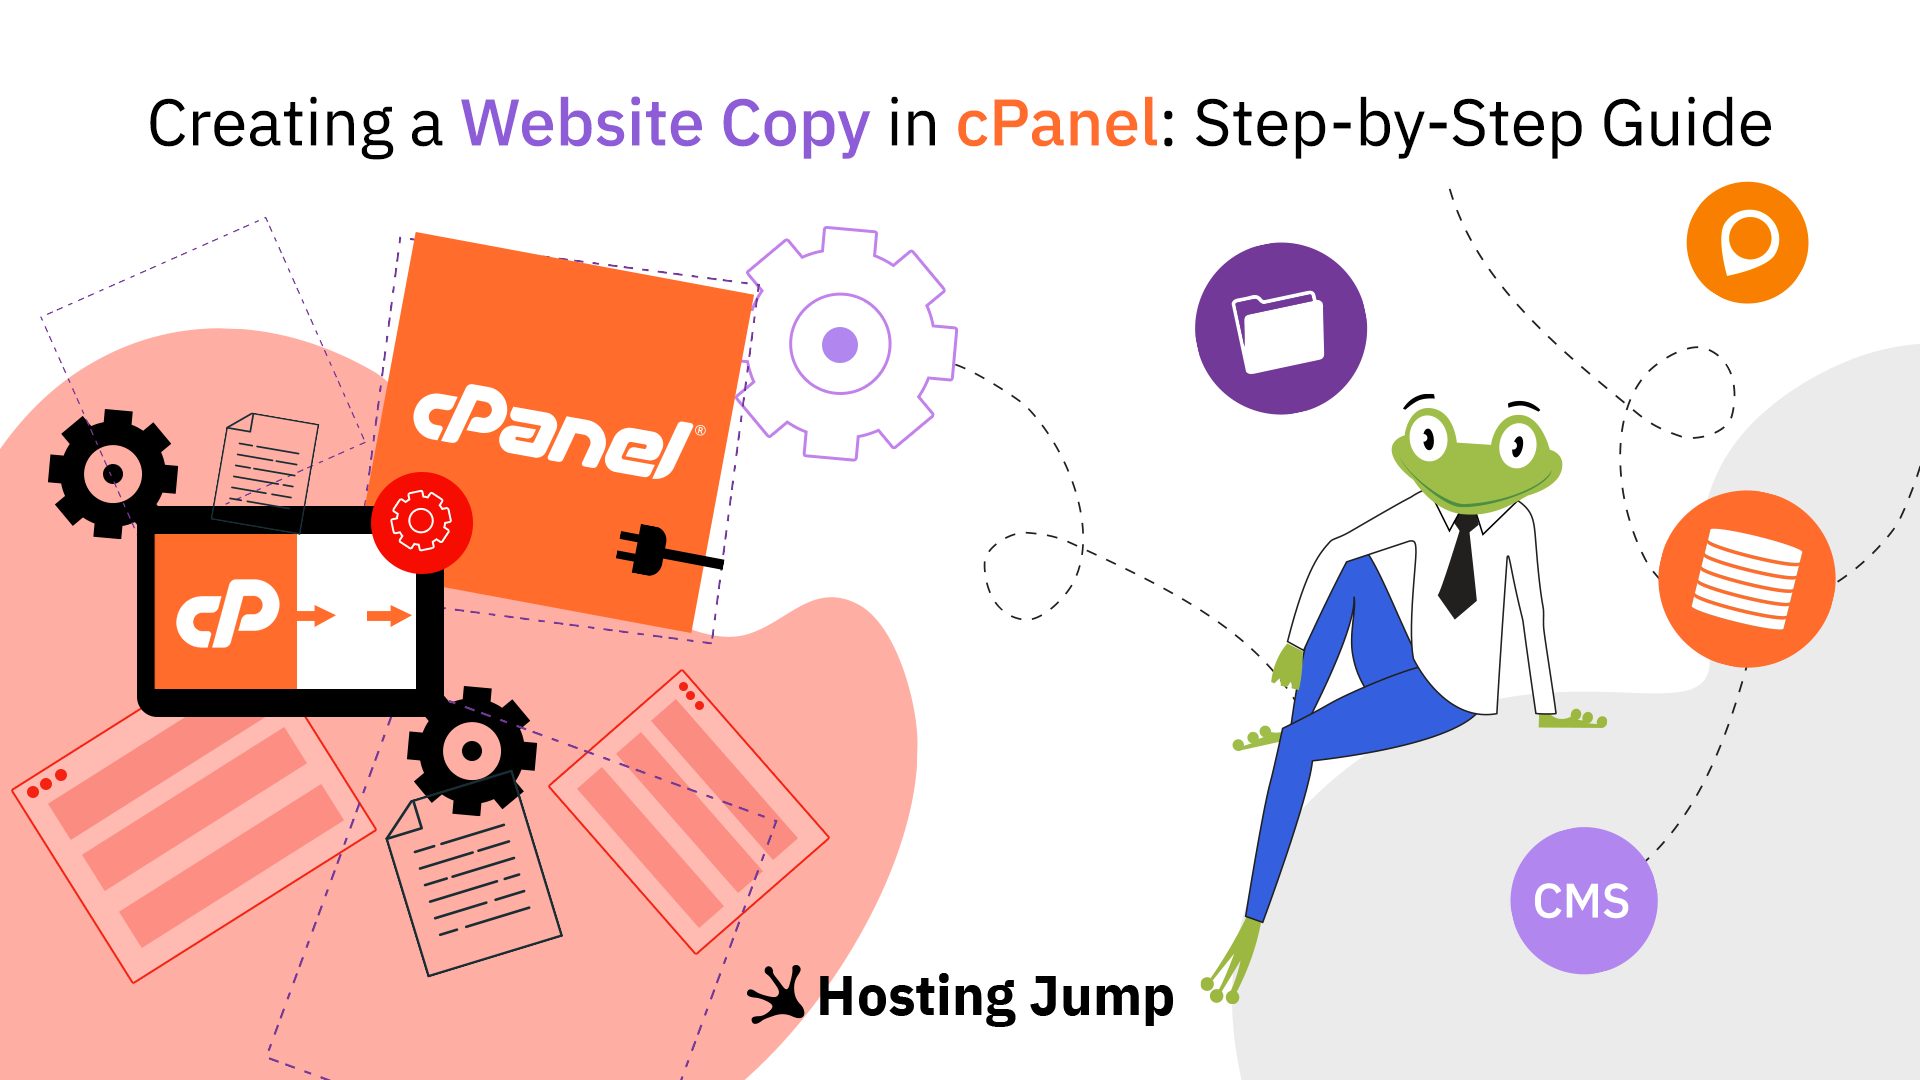 Creating a Website Copy in cPanel: Step-by-Step Guide